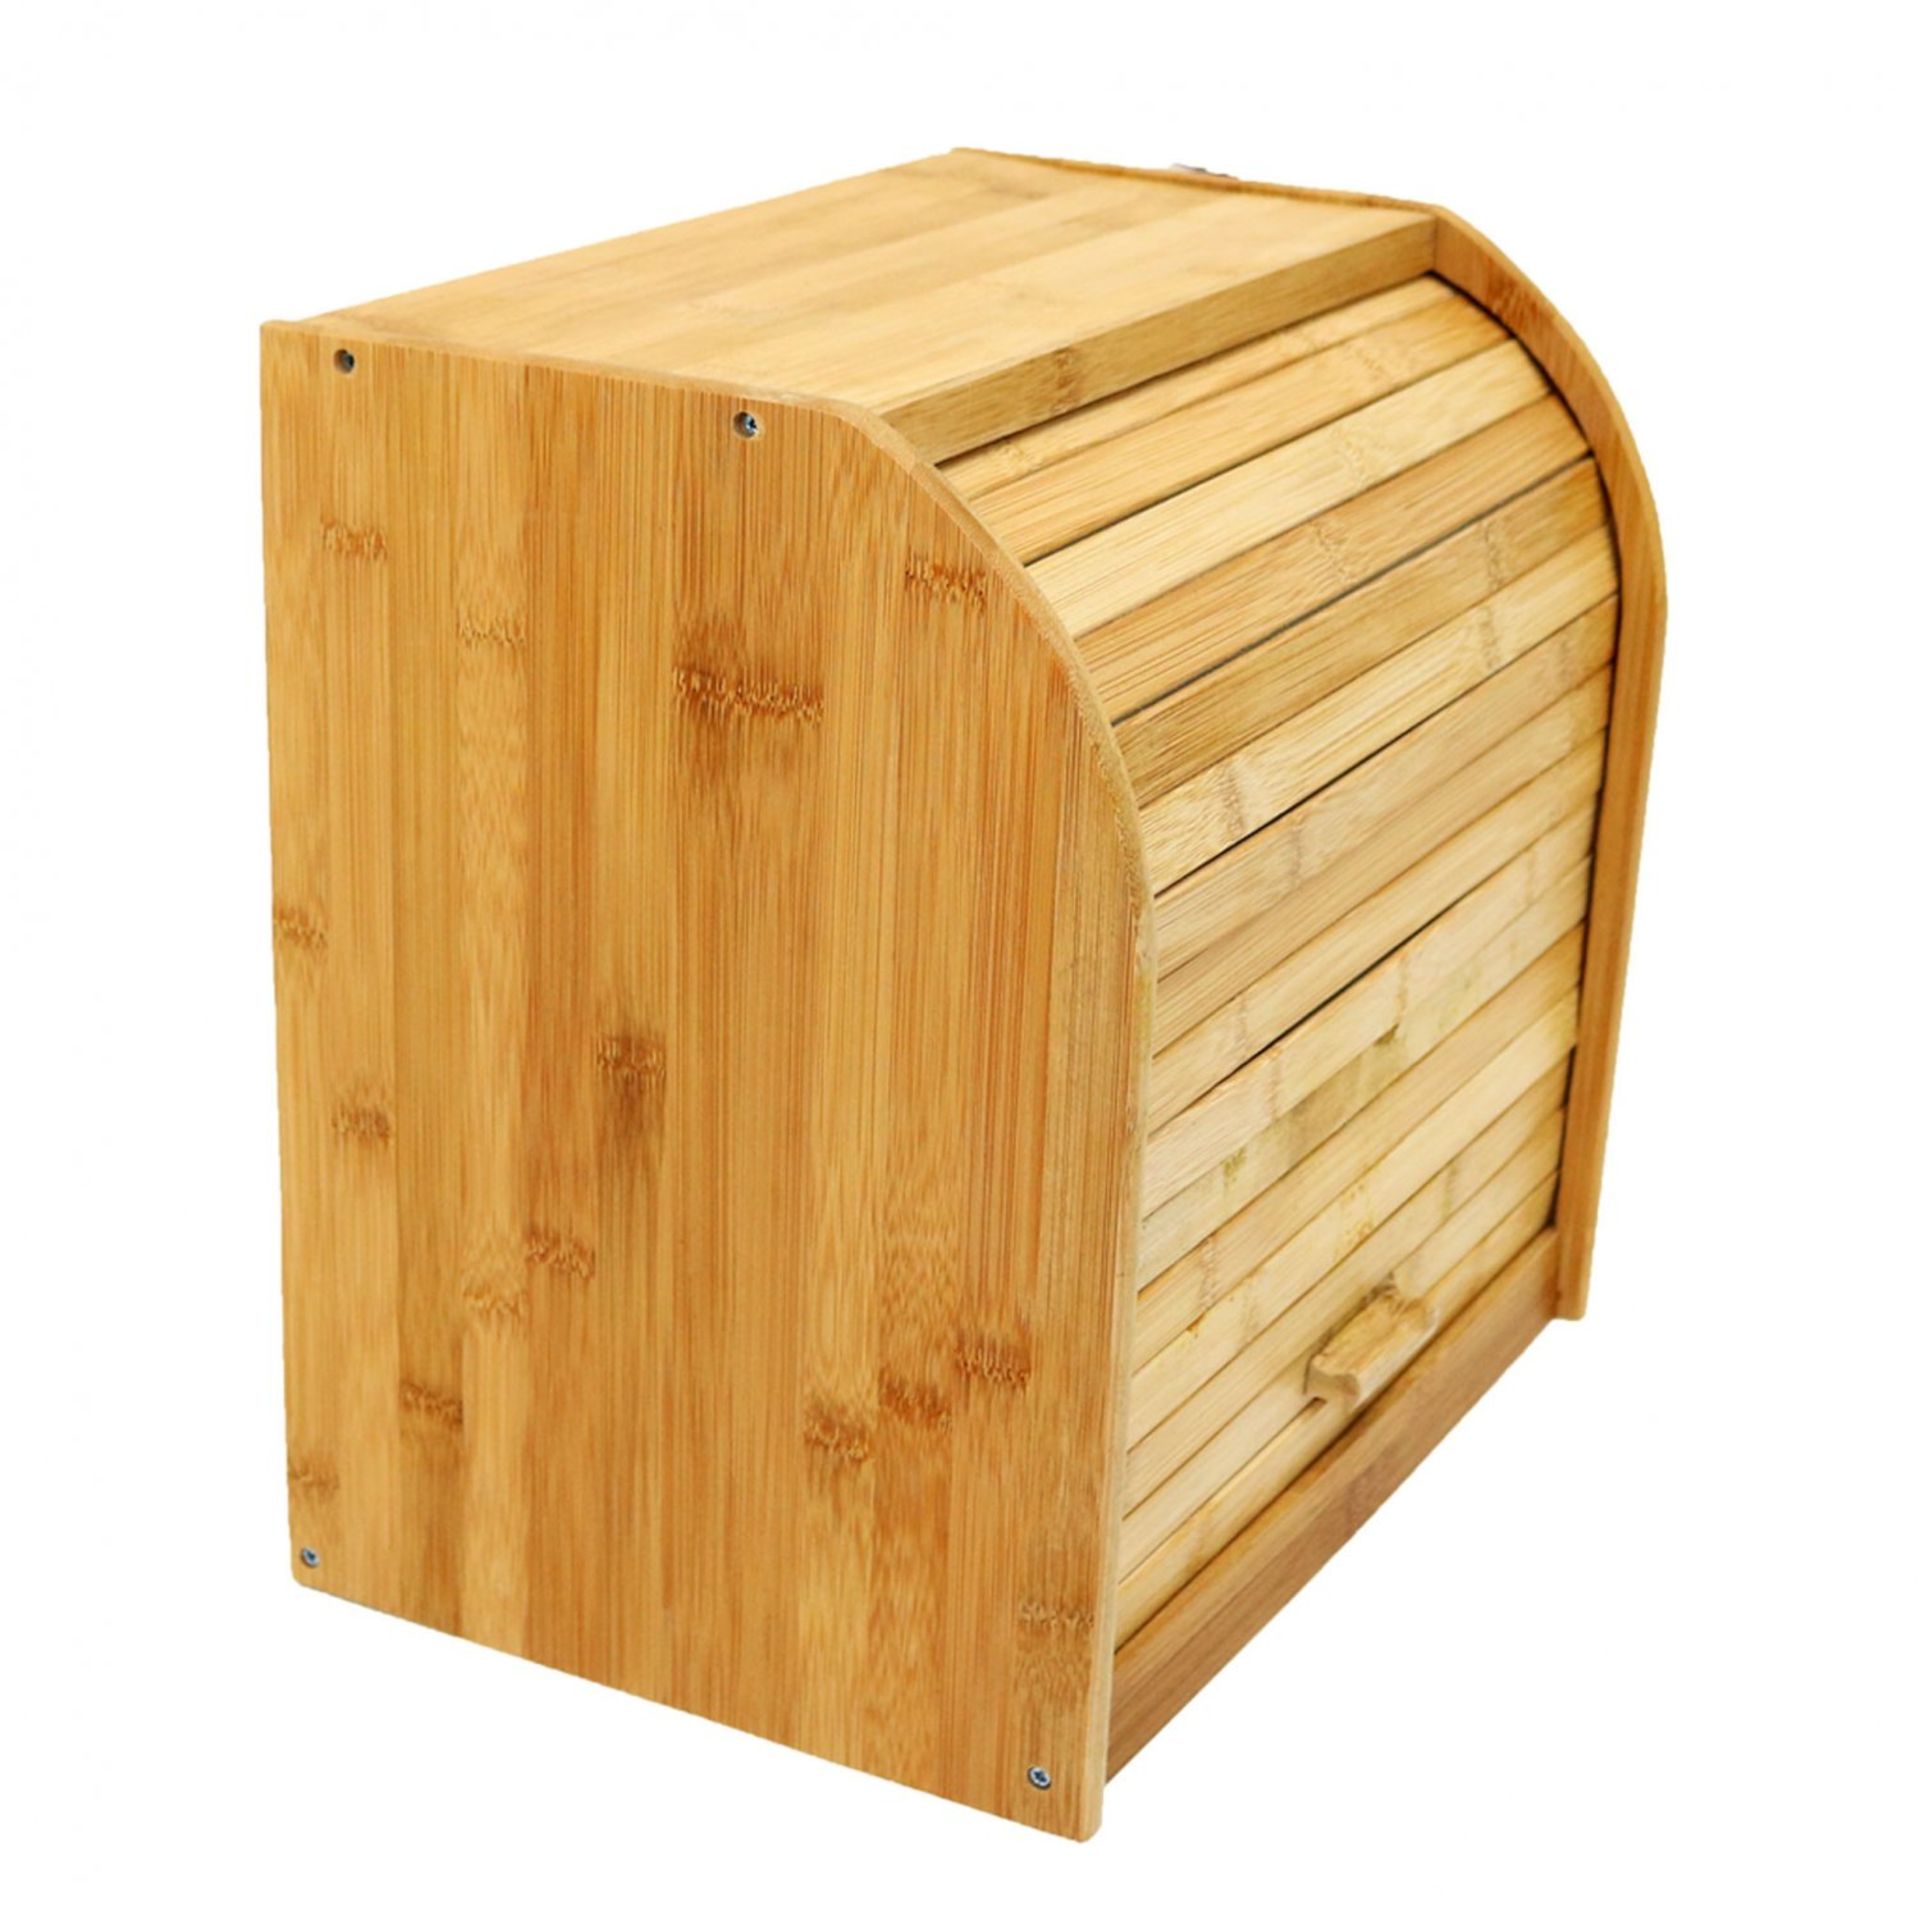 (D24) Double Layer Roll Top Bamboo Wooden Bread Bin Kitchen Storage 100% Natural Bamboo Wipe ...